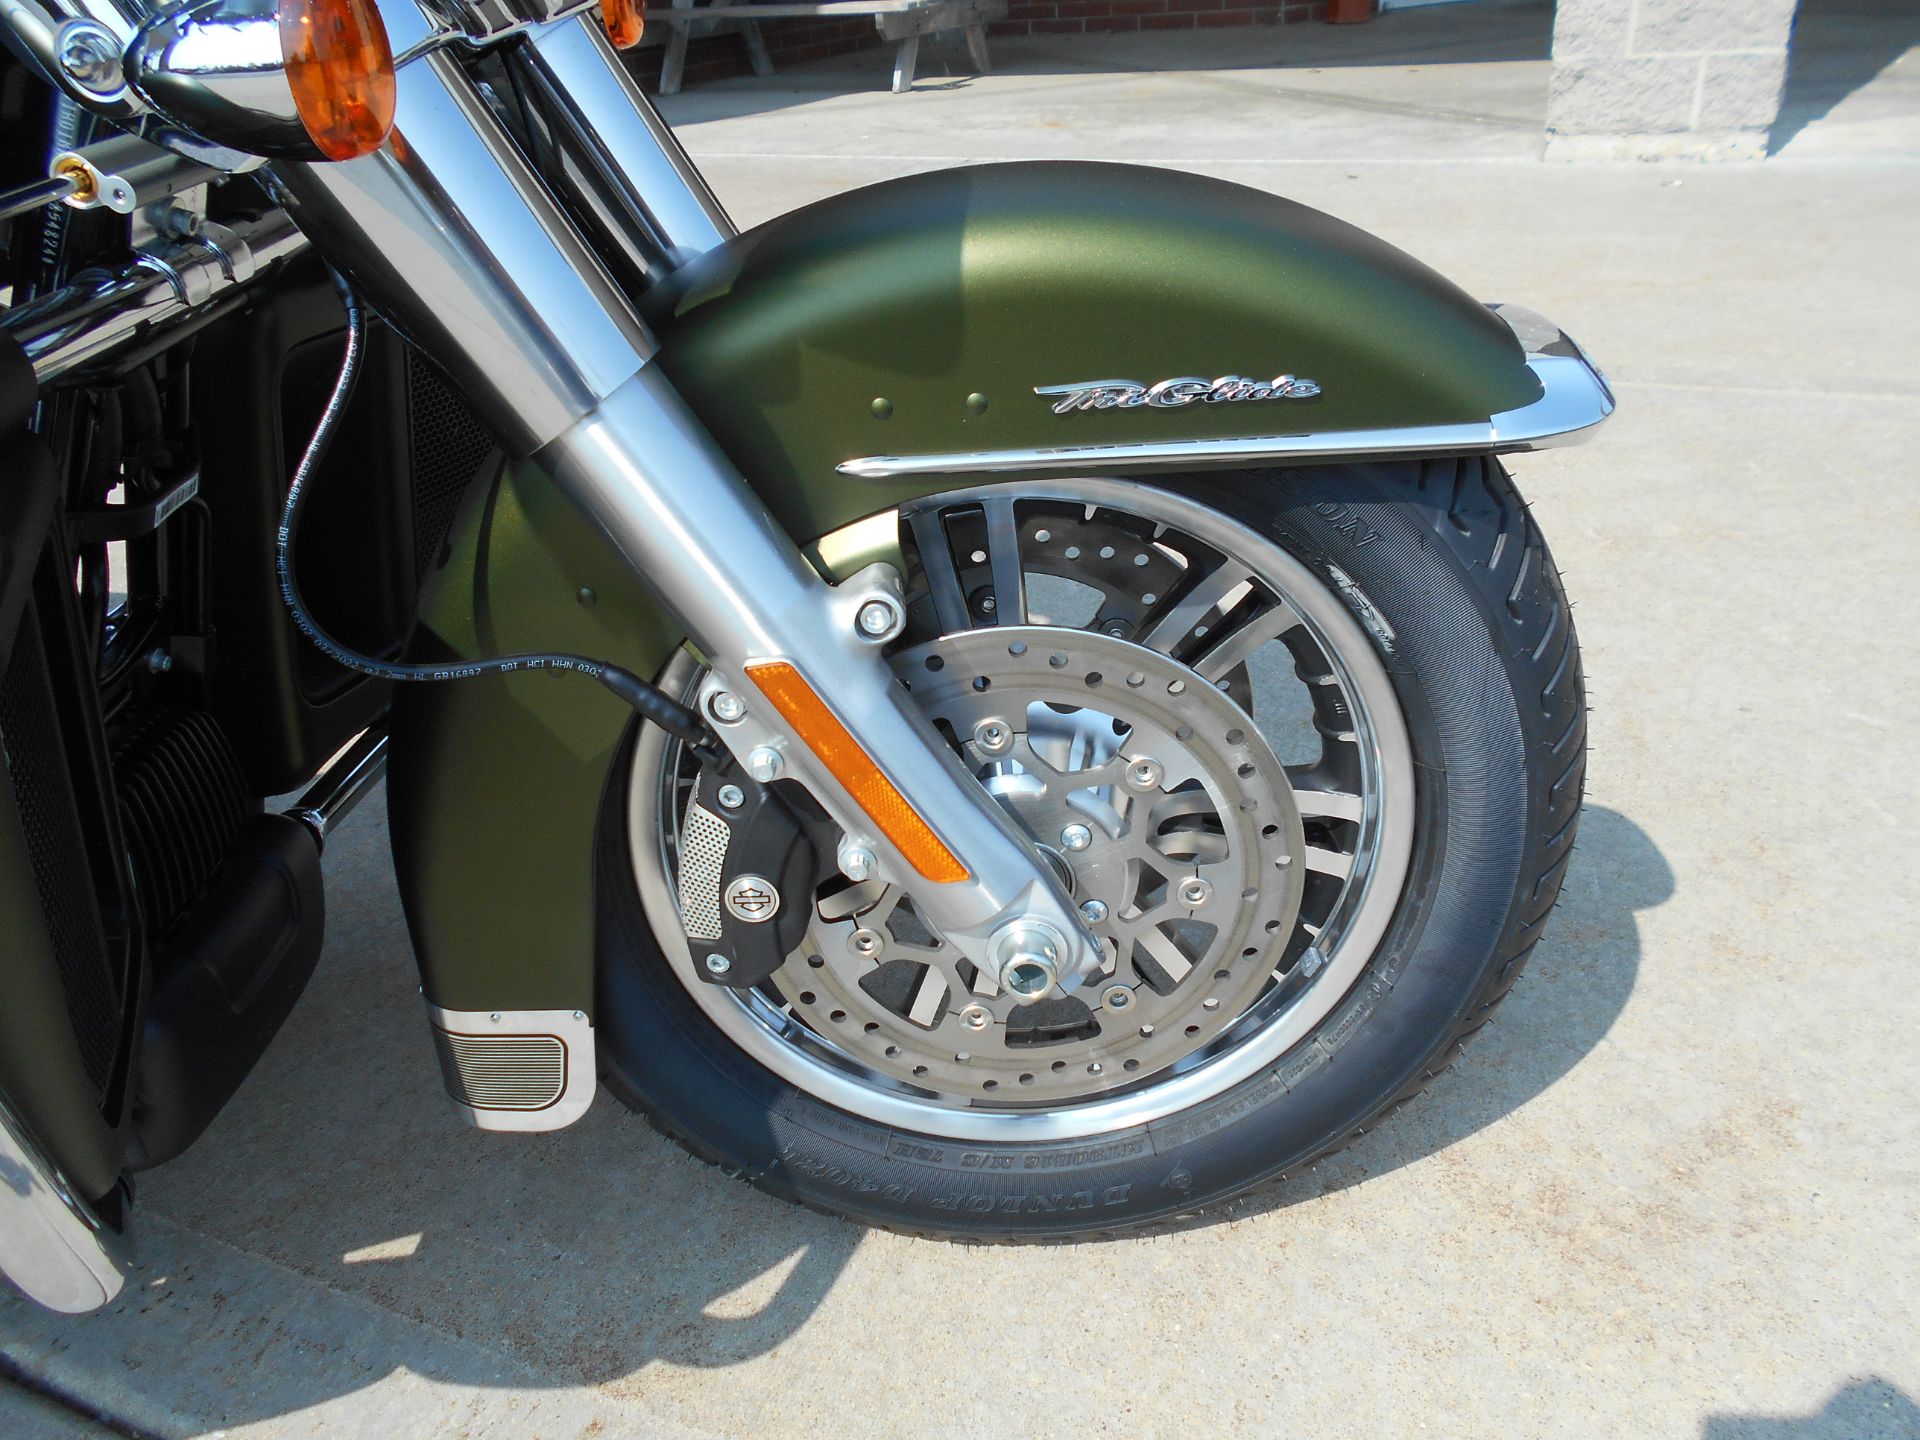 2022 Harley-Davidson Tri Glide Ultra (G.I. Enthusiast Collection) in Mauston, Wisconsin - Photo 3